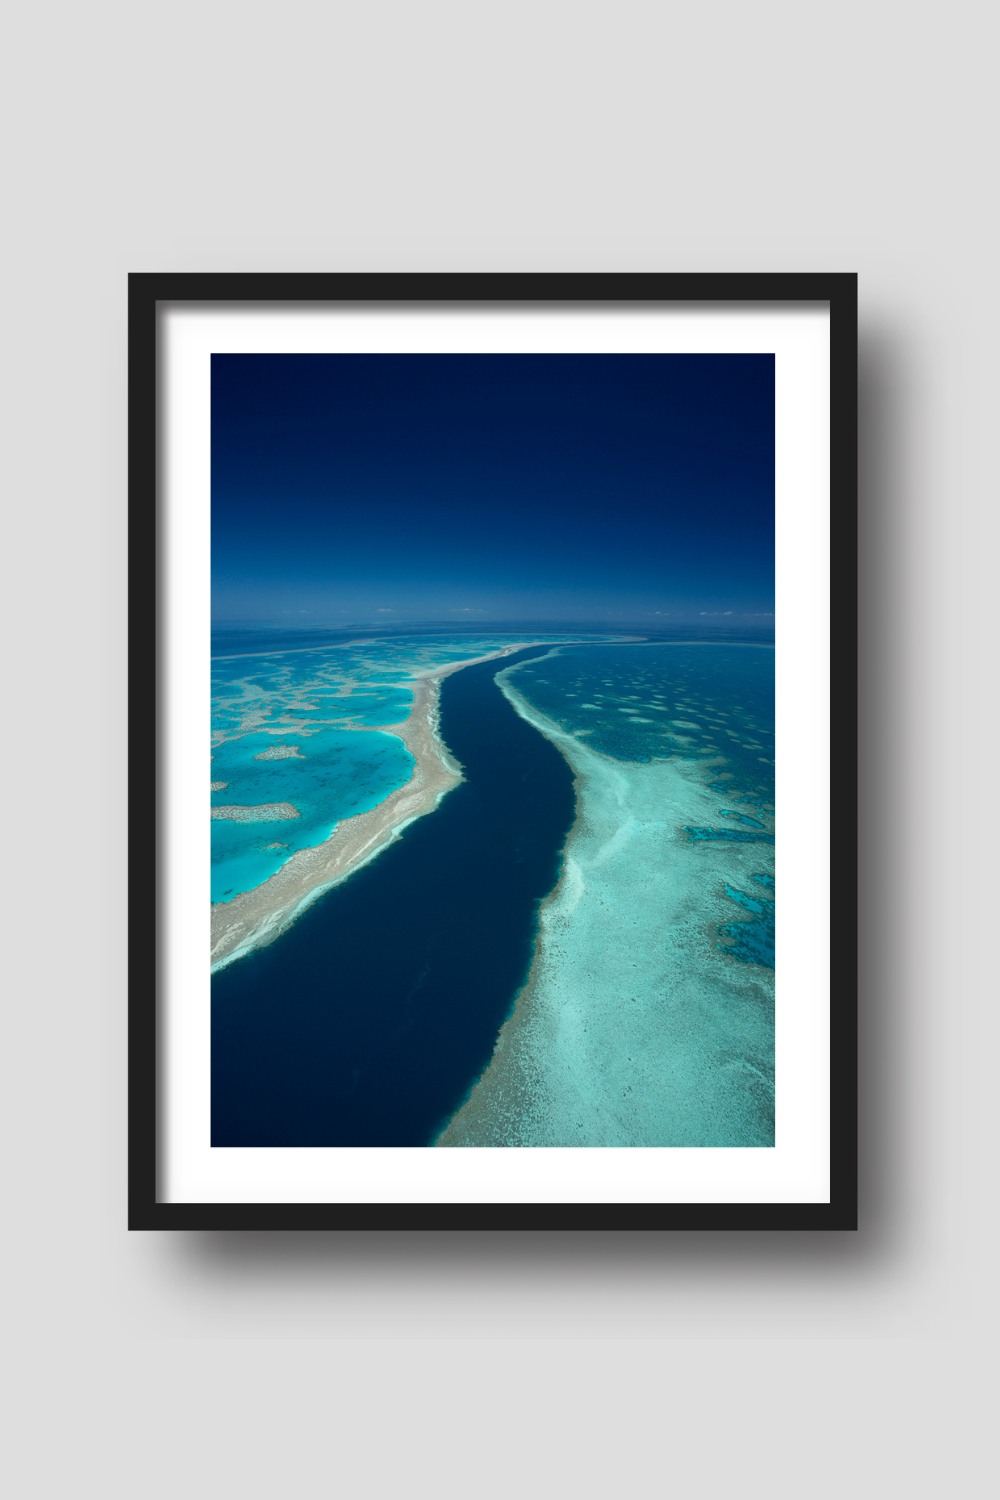 dark blue deep channel of water creating a river between green blue and brown fringing reef